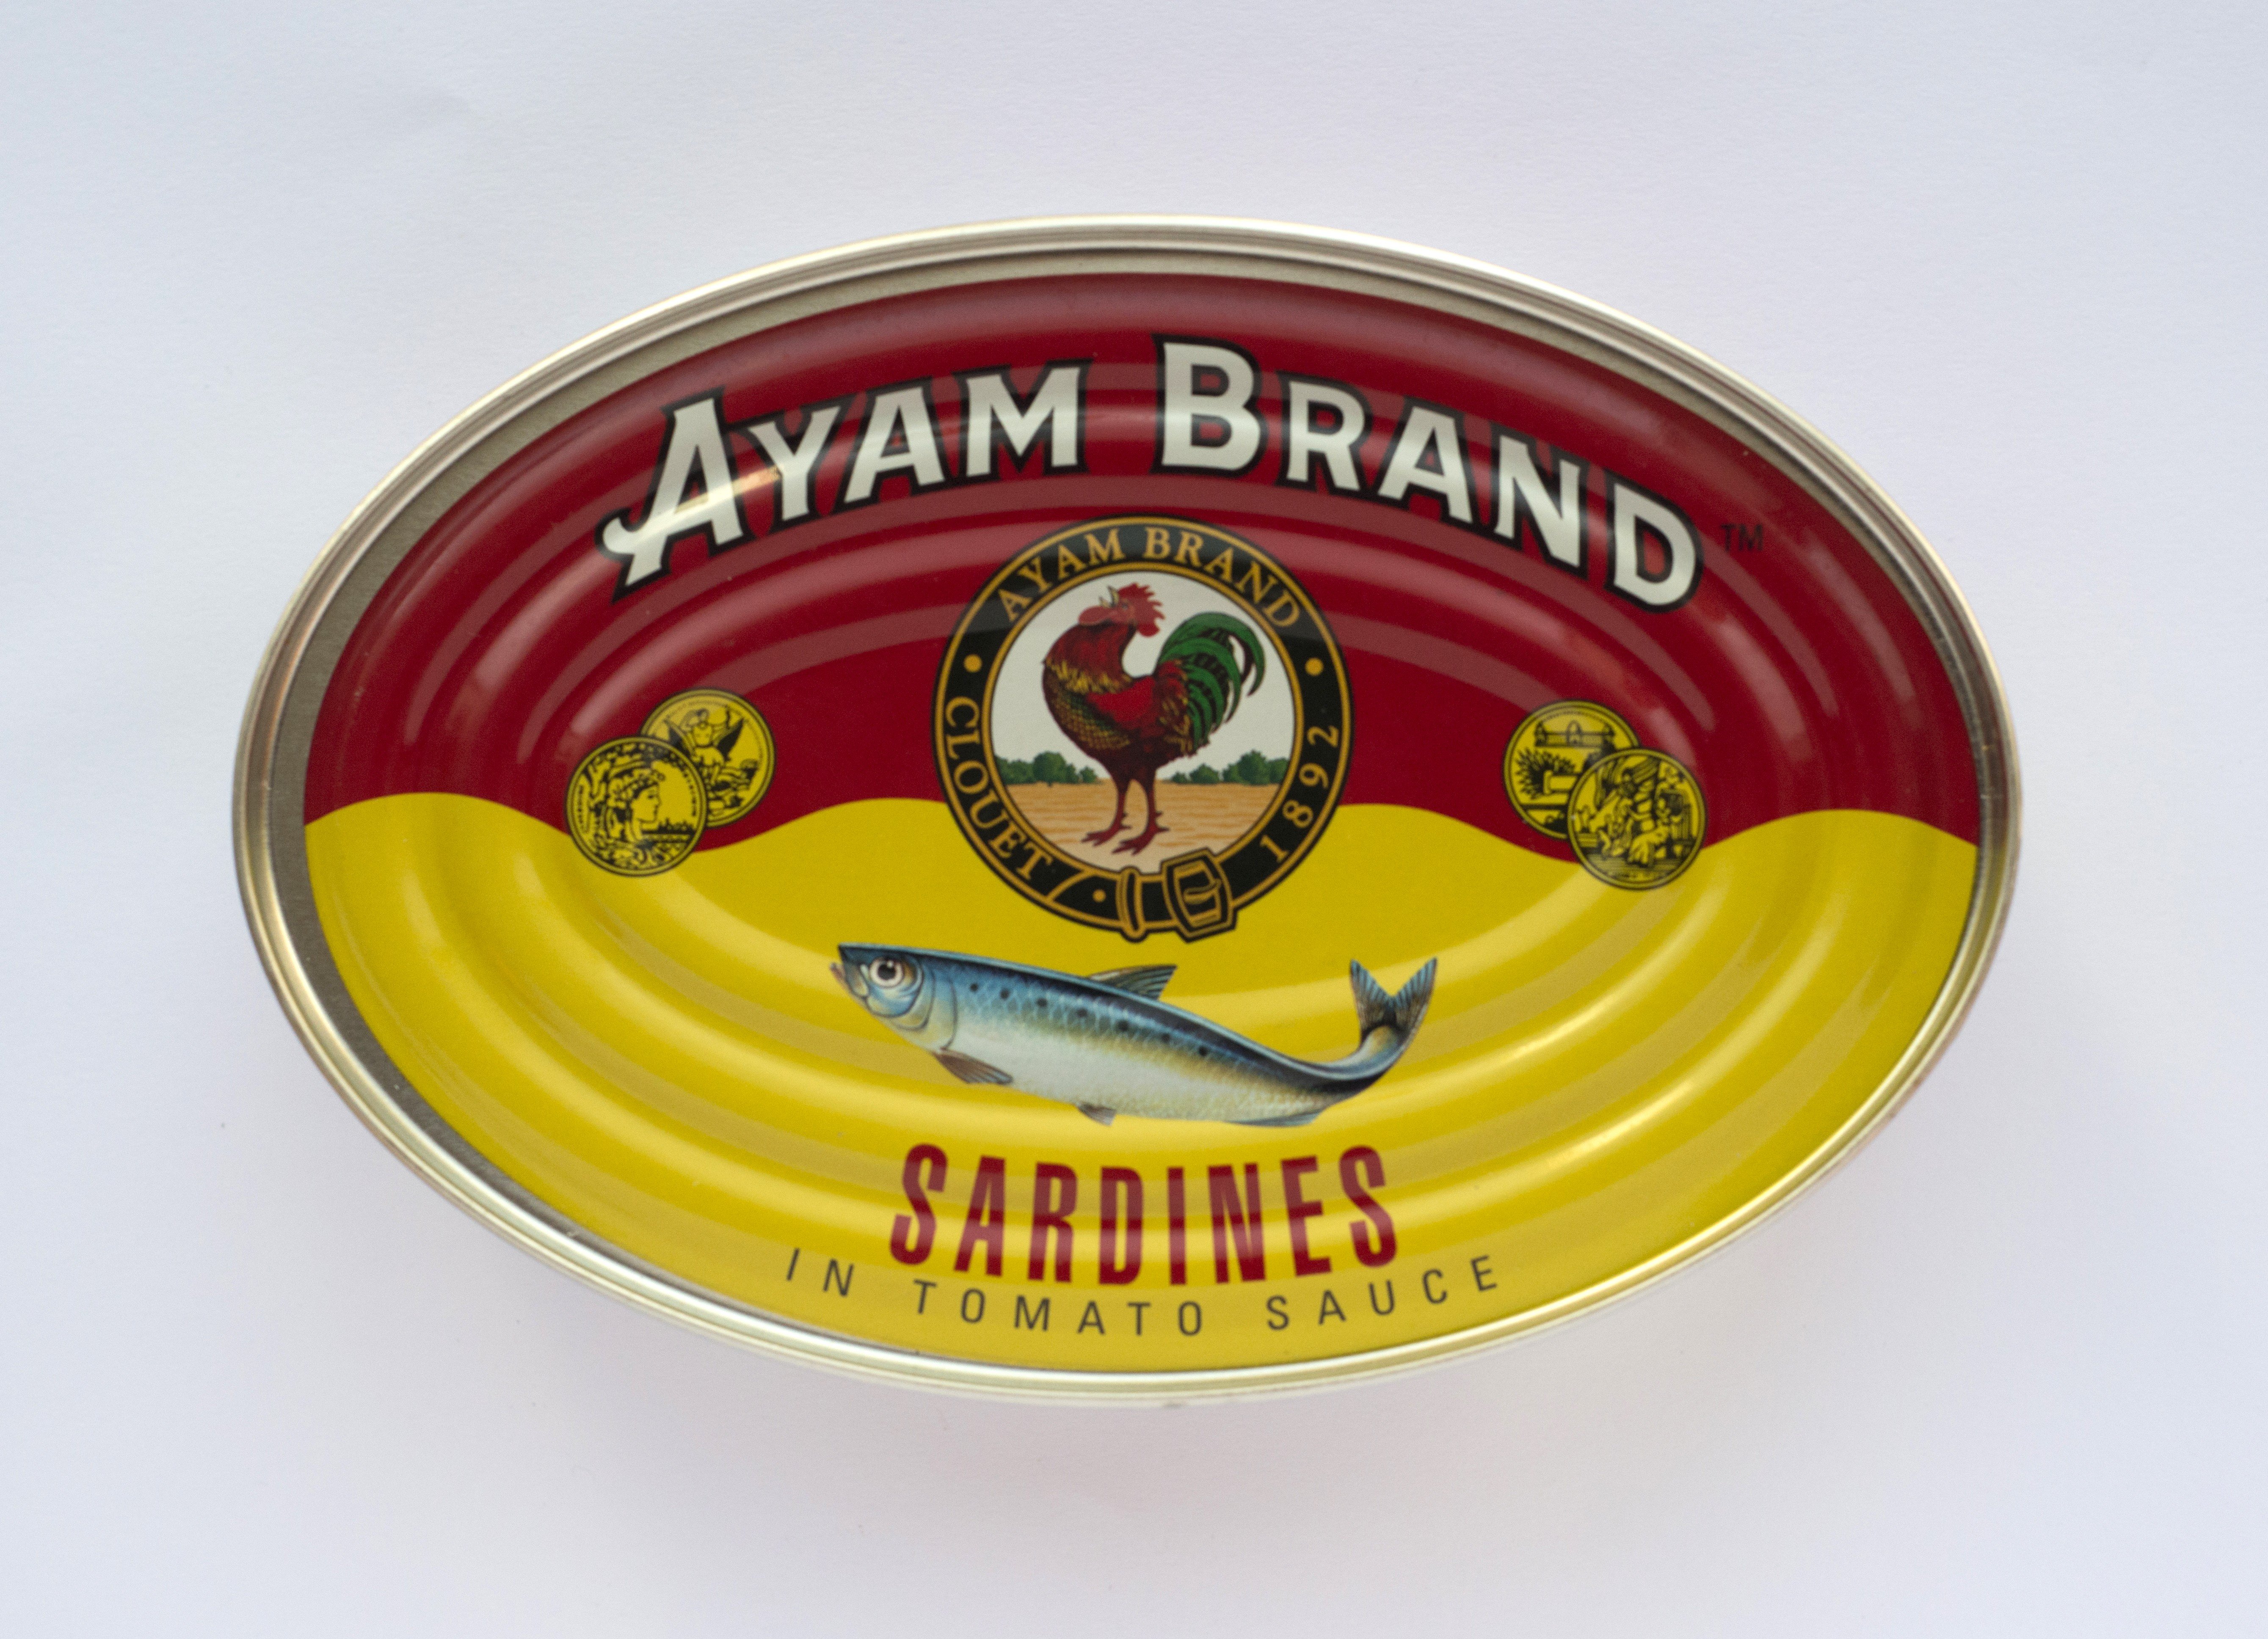 Still French-owned, the company started out selling tinned sardines with Clouet, the name of its founder, on the cans along with a rooster, symbol of France. That led Malays to dub it ‘chop ayam’ – the chicken brand. The rest is history